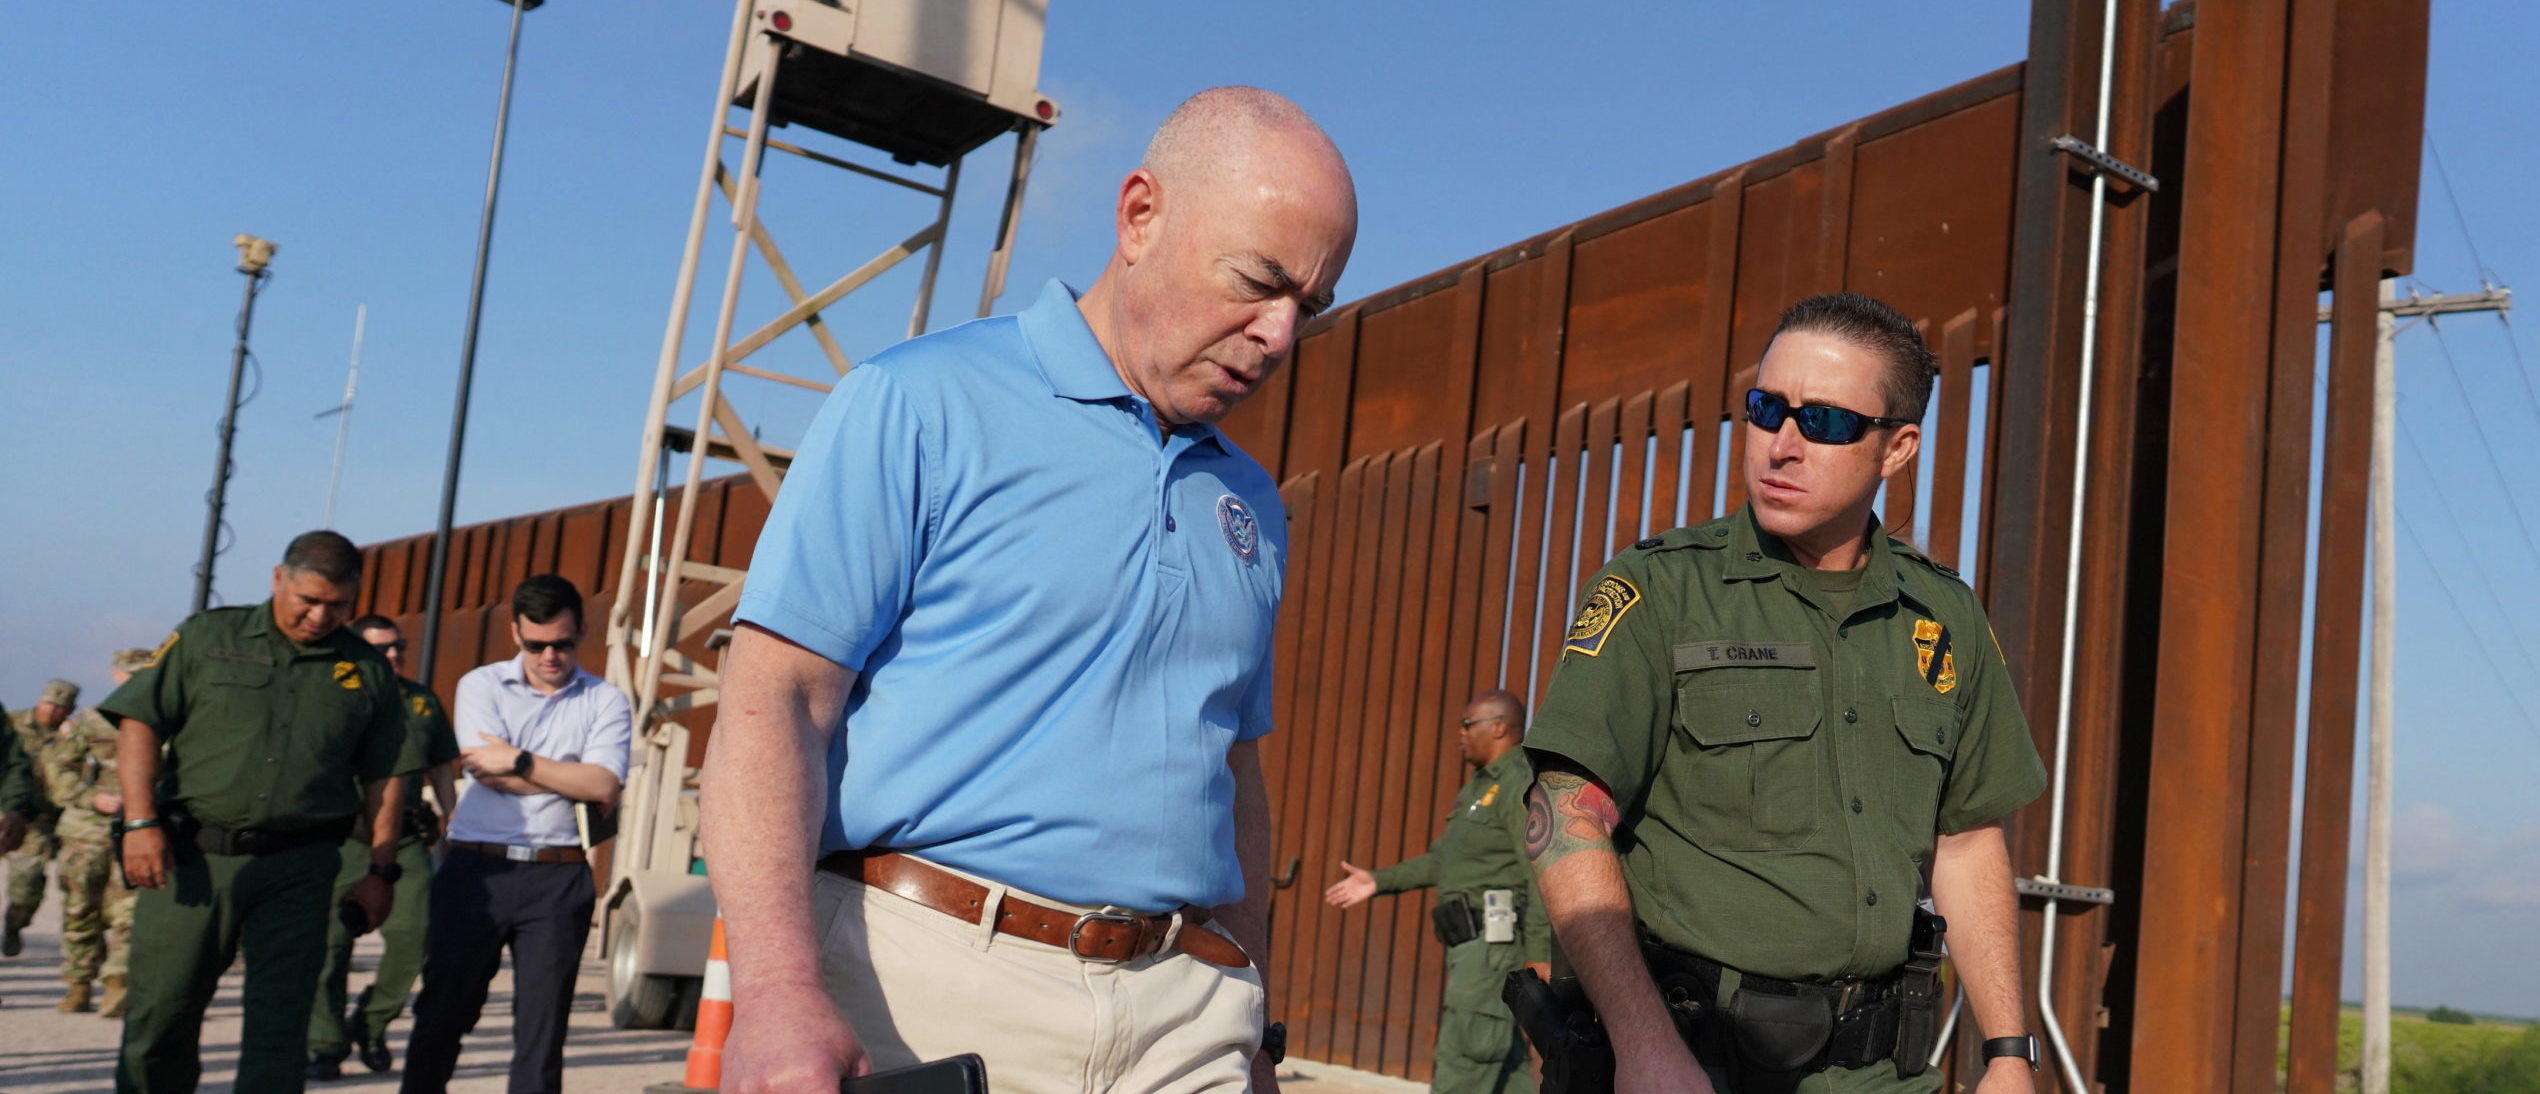 U.S. Homeland Security Secretary Alejandro Mayorka listens to deputy patrol agent in charge of the U.S. Border Patrol Anthony Crane as he tours the section of the border wall in Hidalgo, Texas, U.S. May 17, 2022. Joel Martinez/Pool via REUTERS